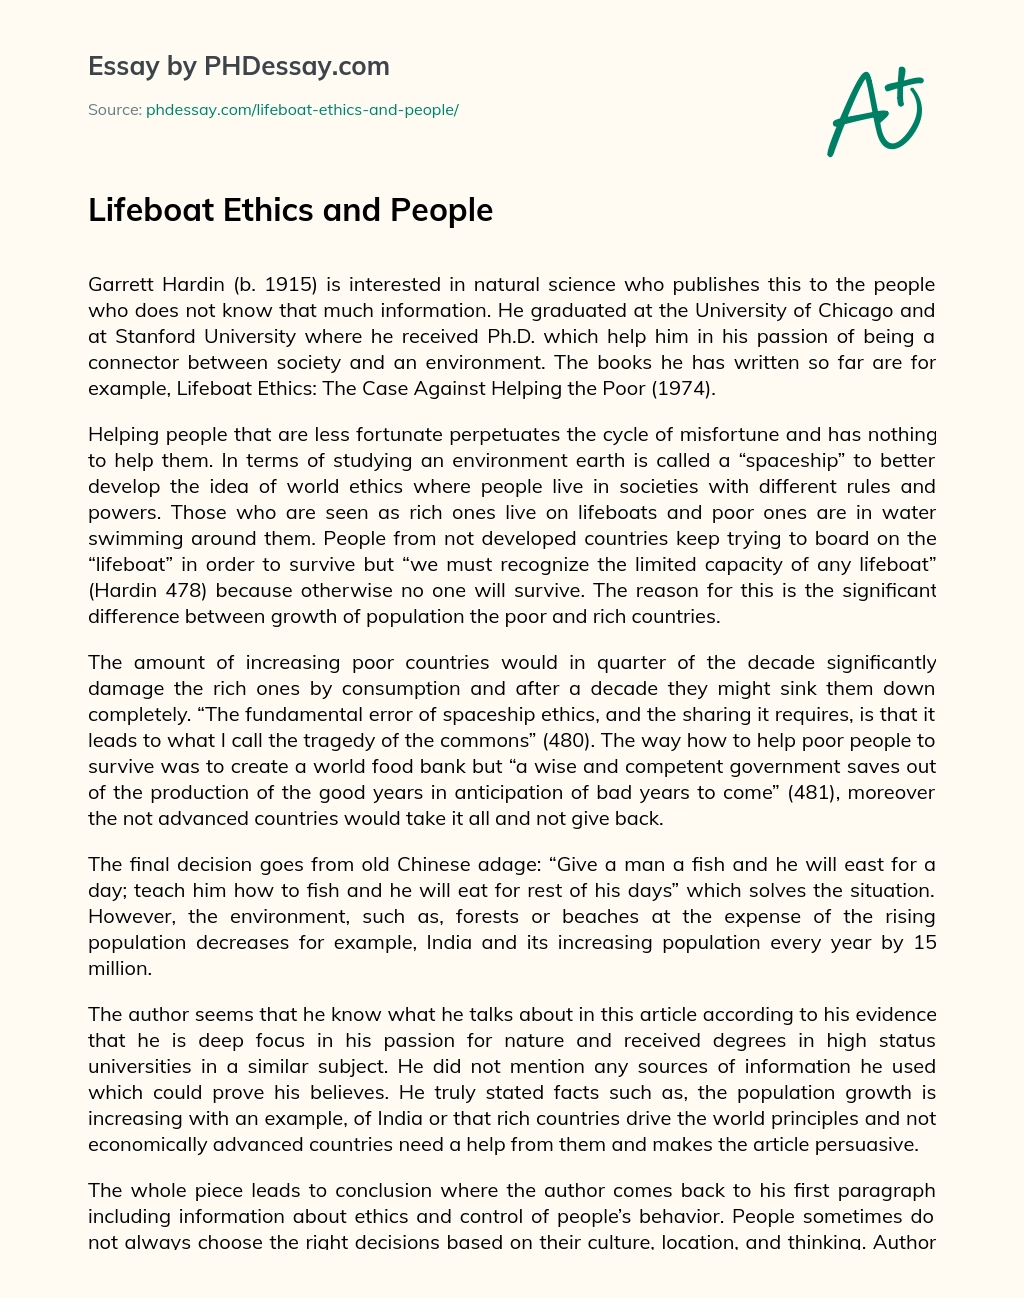 Lifeboat Ethics and People essay